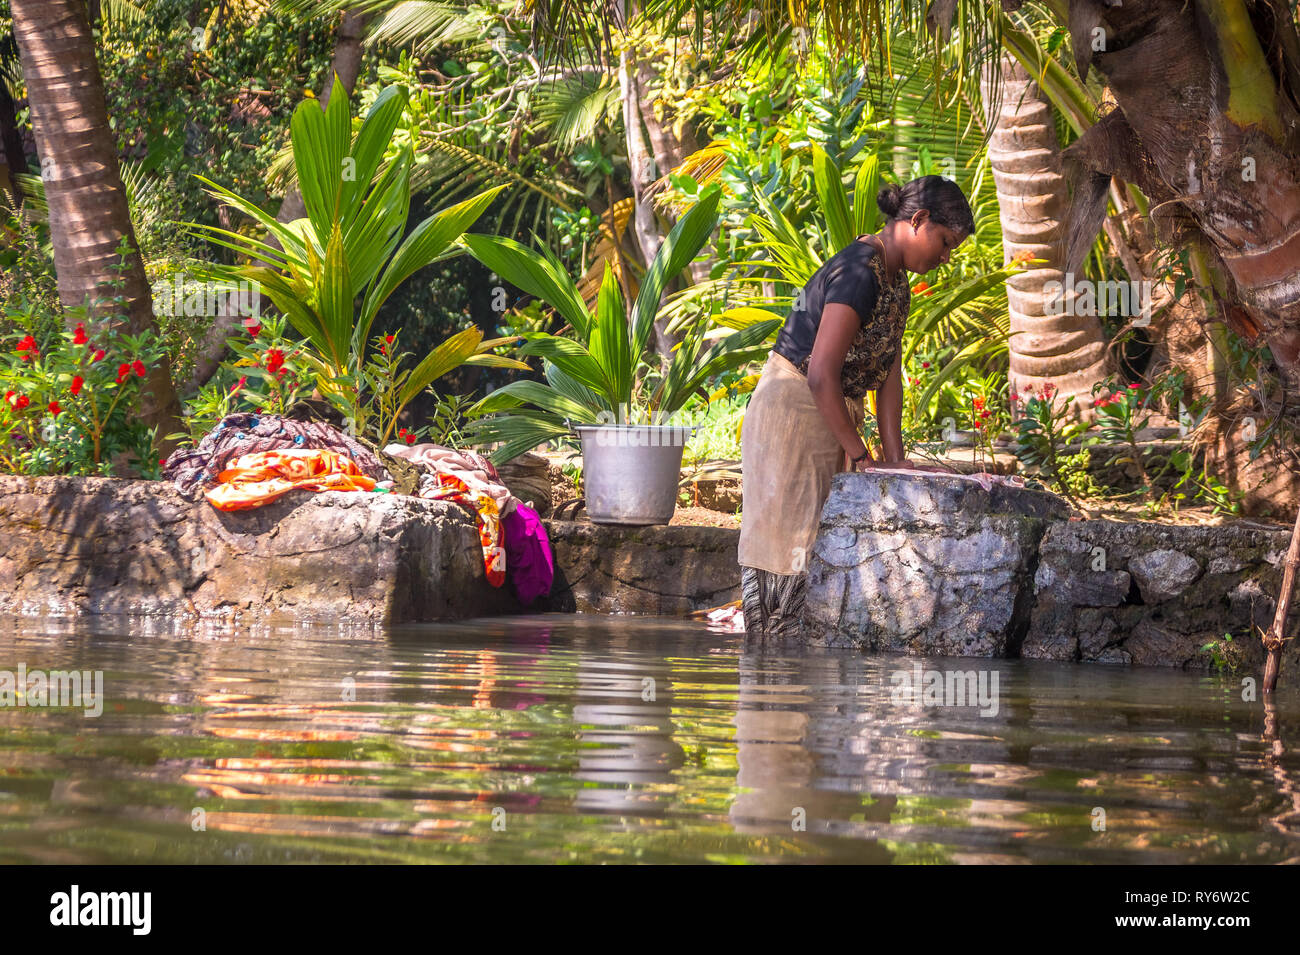 Village Woman Hand Washing Colorful Clothes in Kerala Backwaters, India Stock Photo